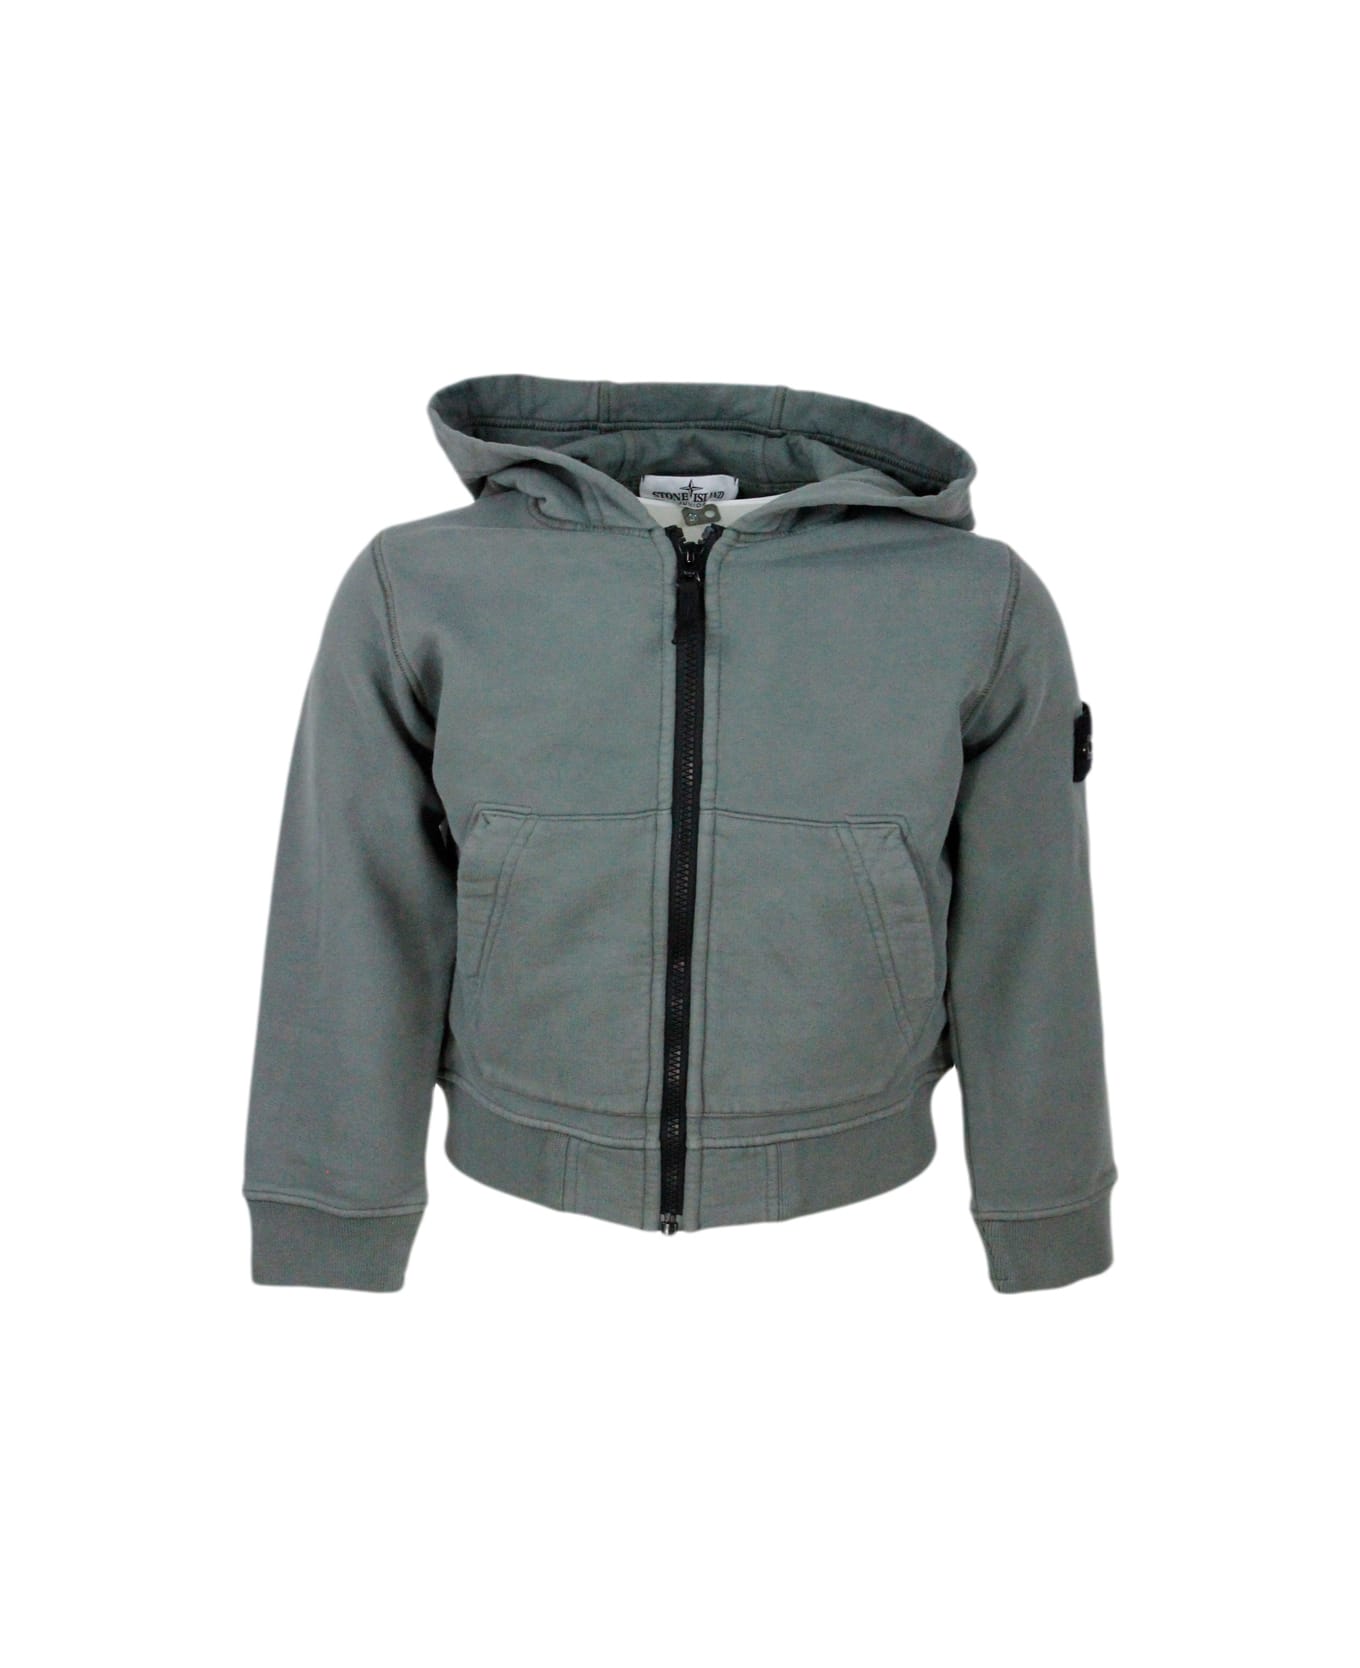 Stone Island Full Zip Hoodie With Long Sleeves In Stretch Cotton With Badge On The Left Sleeve - Grey